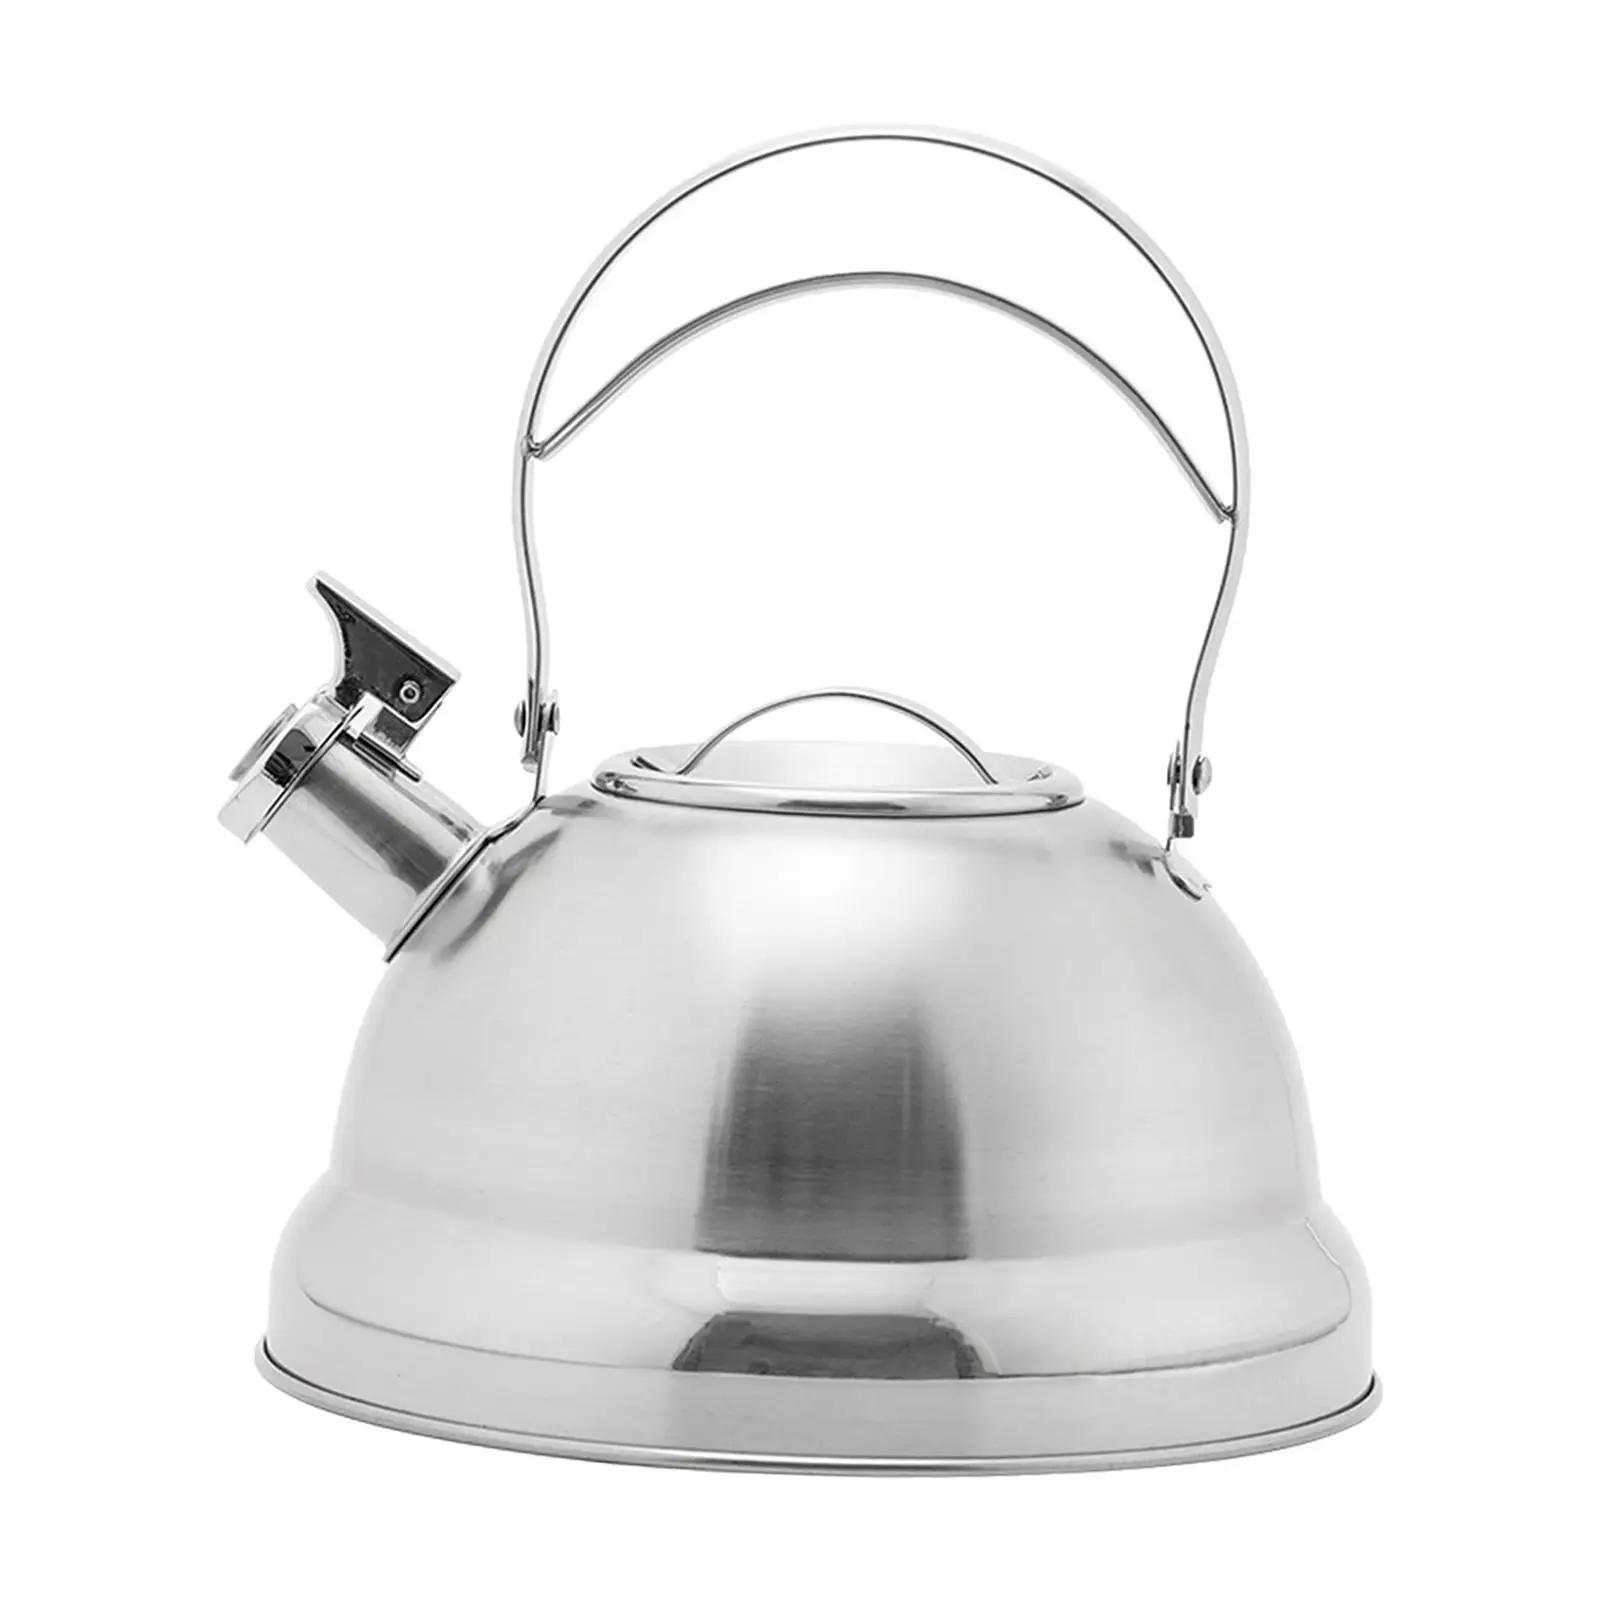 Teakettle 3.5L Kitchen Appliances Universal Whistling Kettle Coffee Tea Kettle Tea Pot with Handle for Home Outdoor Kitchen